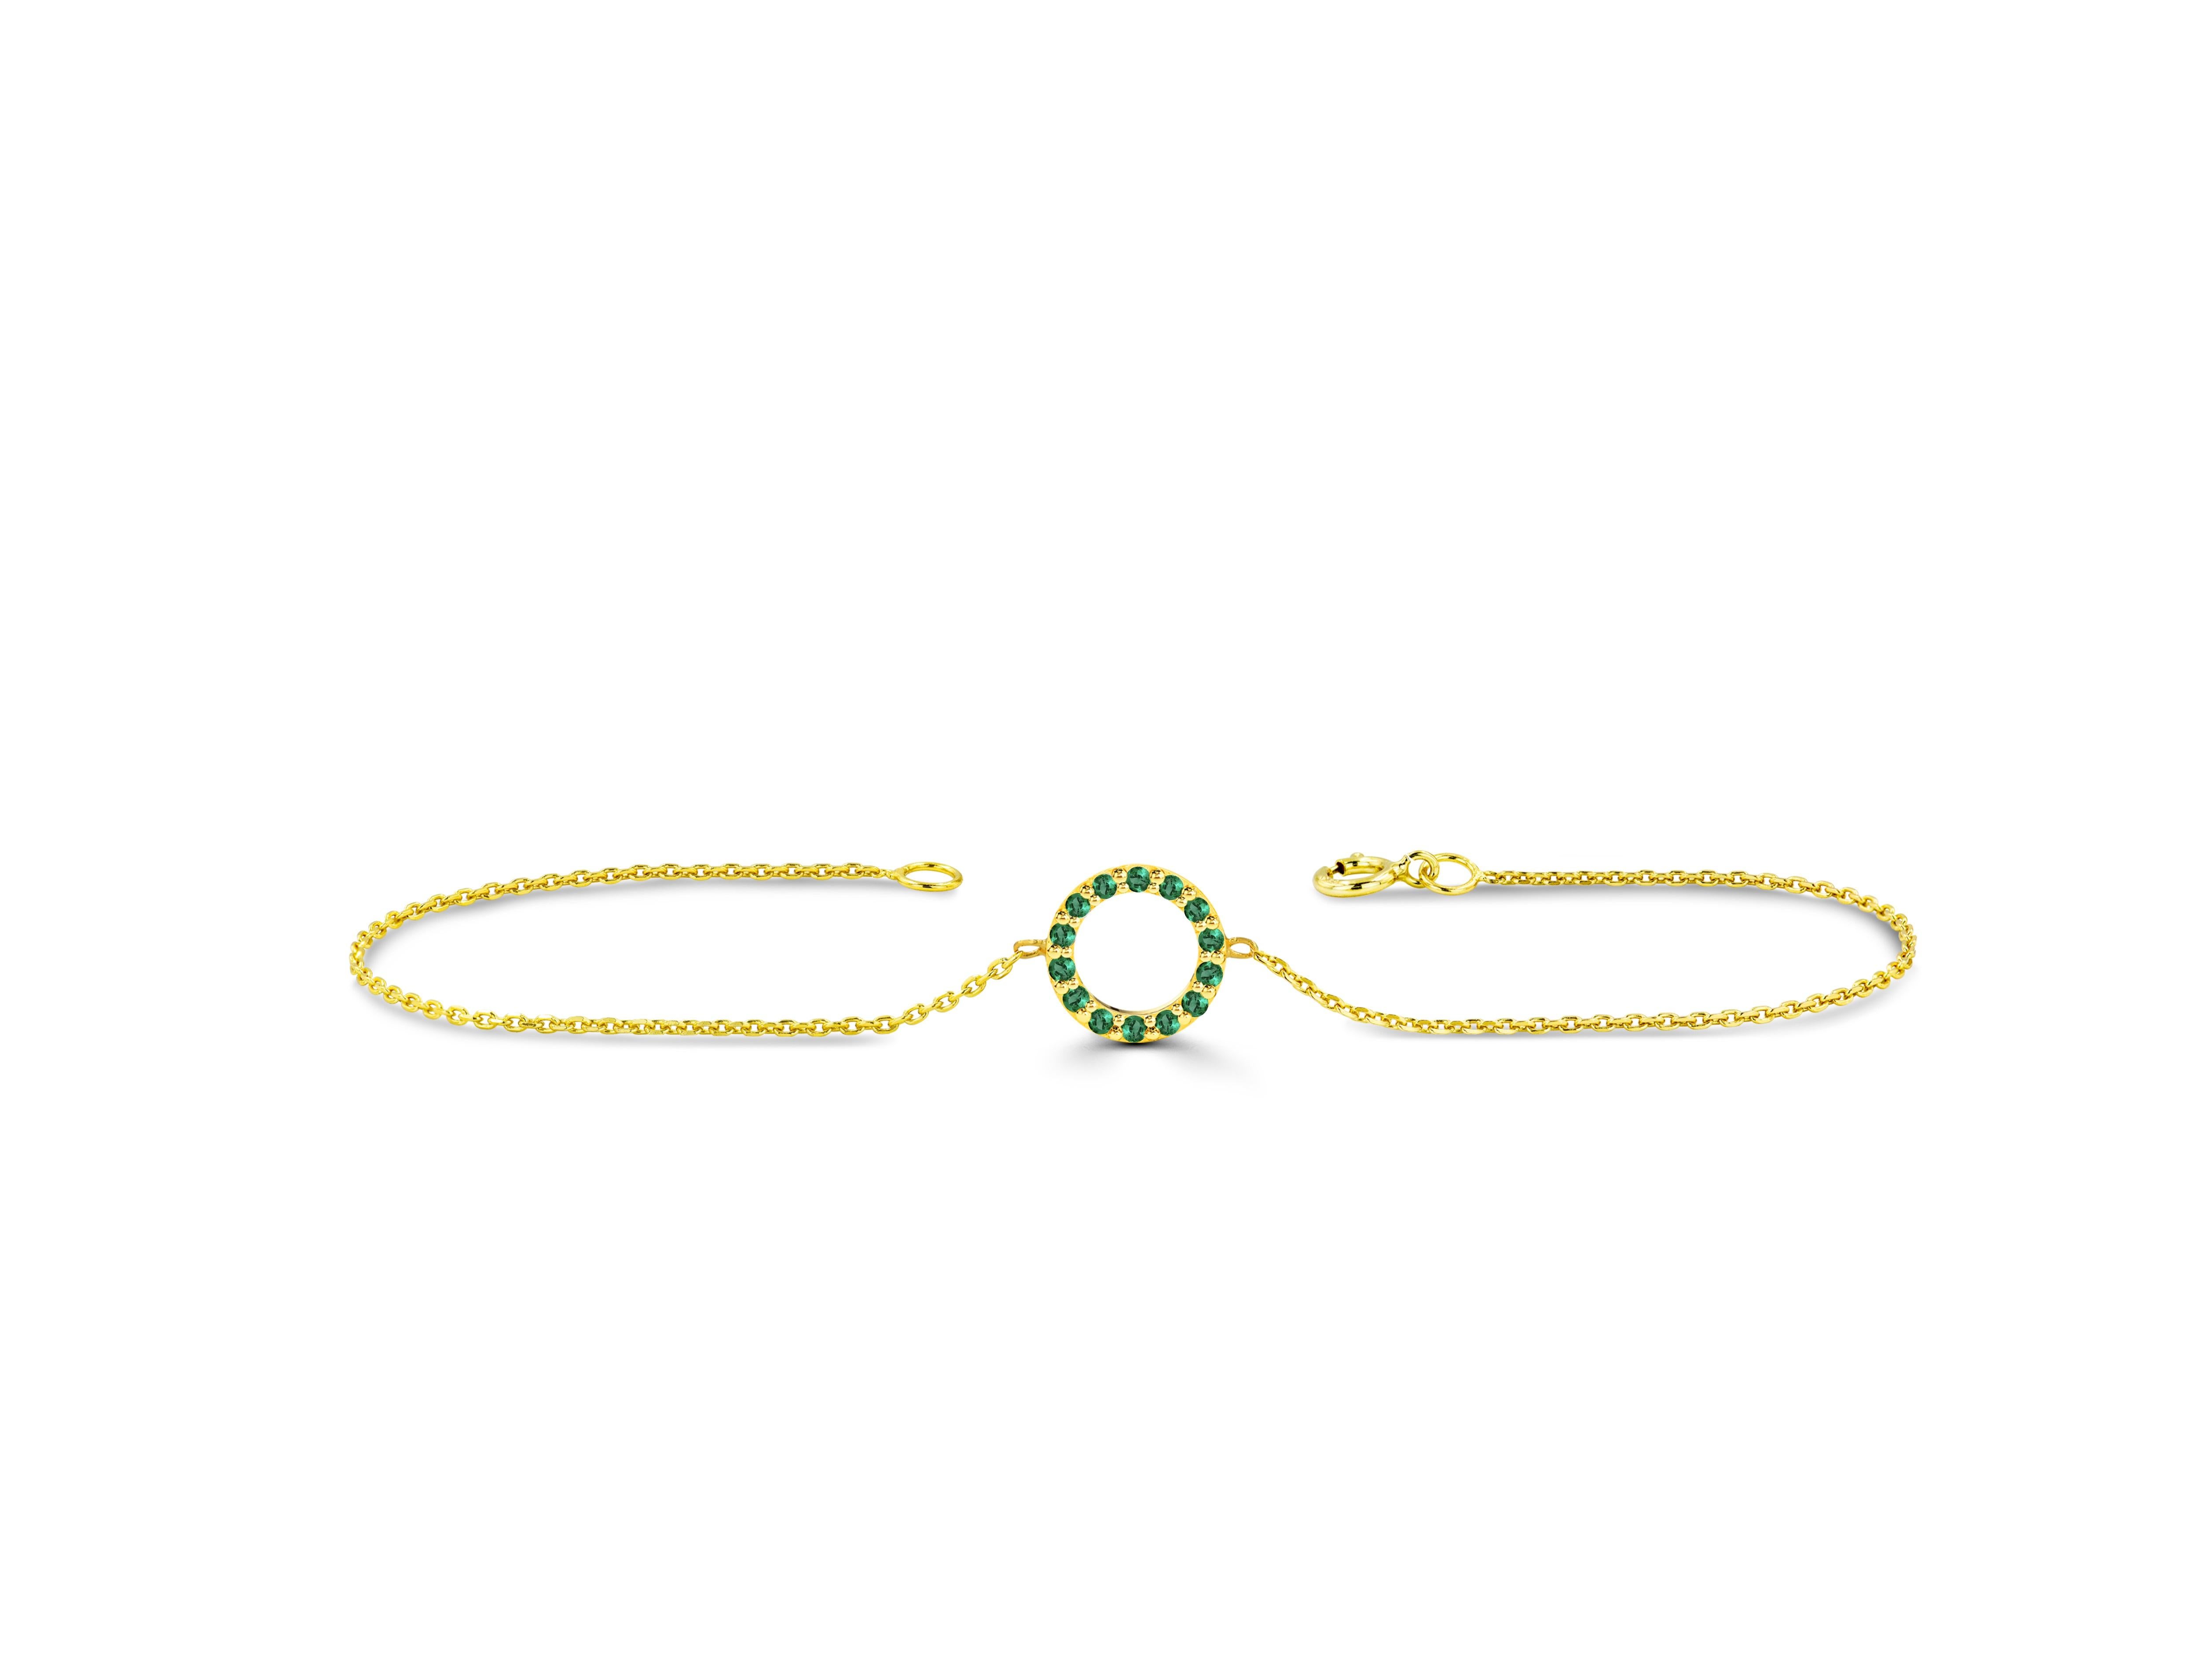 Delicate and Minimal Gemstone open Circle Bracelet is our best seller made of 18k  solid gold available in Rose gold, yellow gold, and white gold. With natural genuine round-cut Gemstones, each gemstone is hand selected by me to ensure quality and